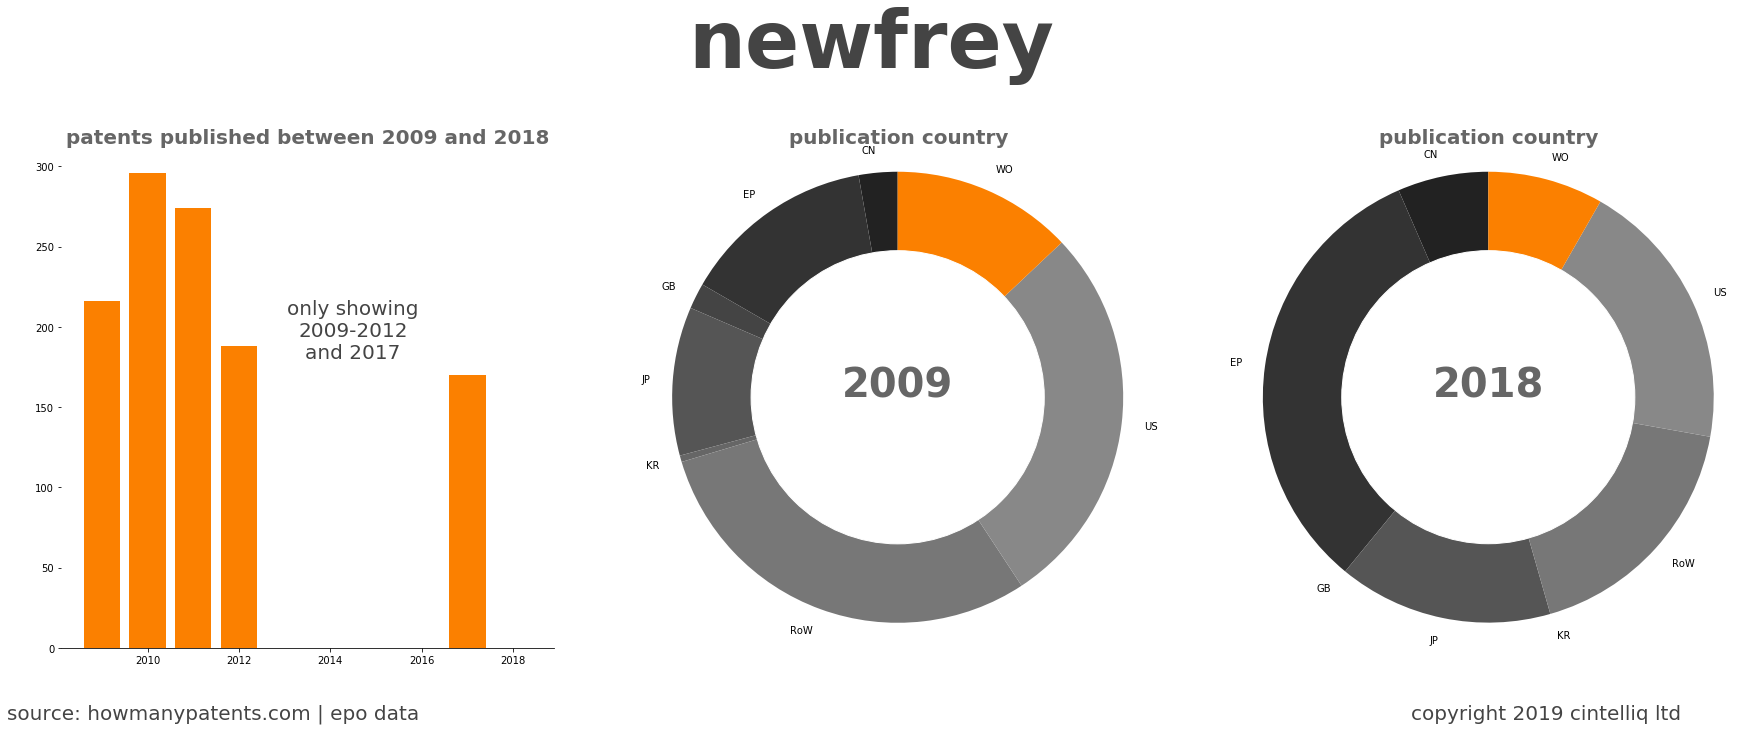 summary of patents for Newfrey